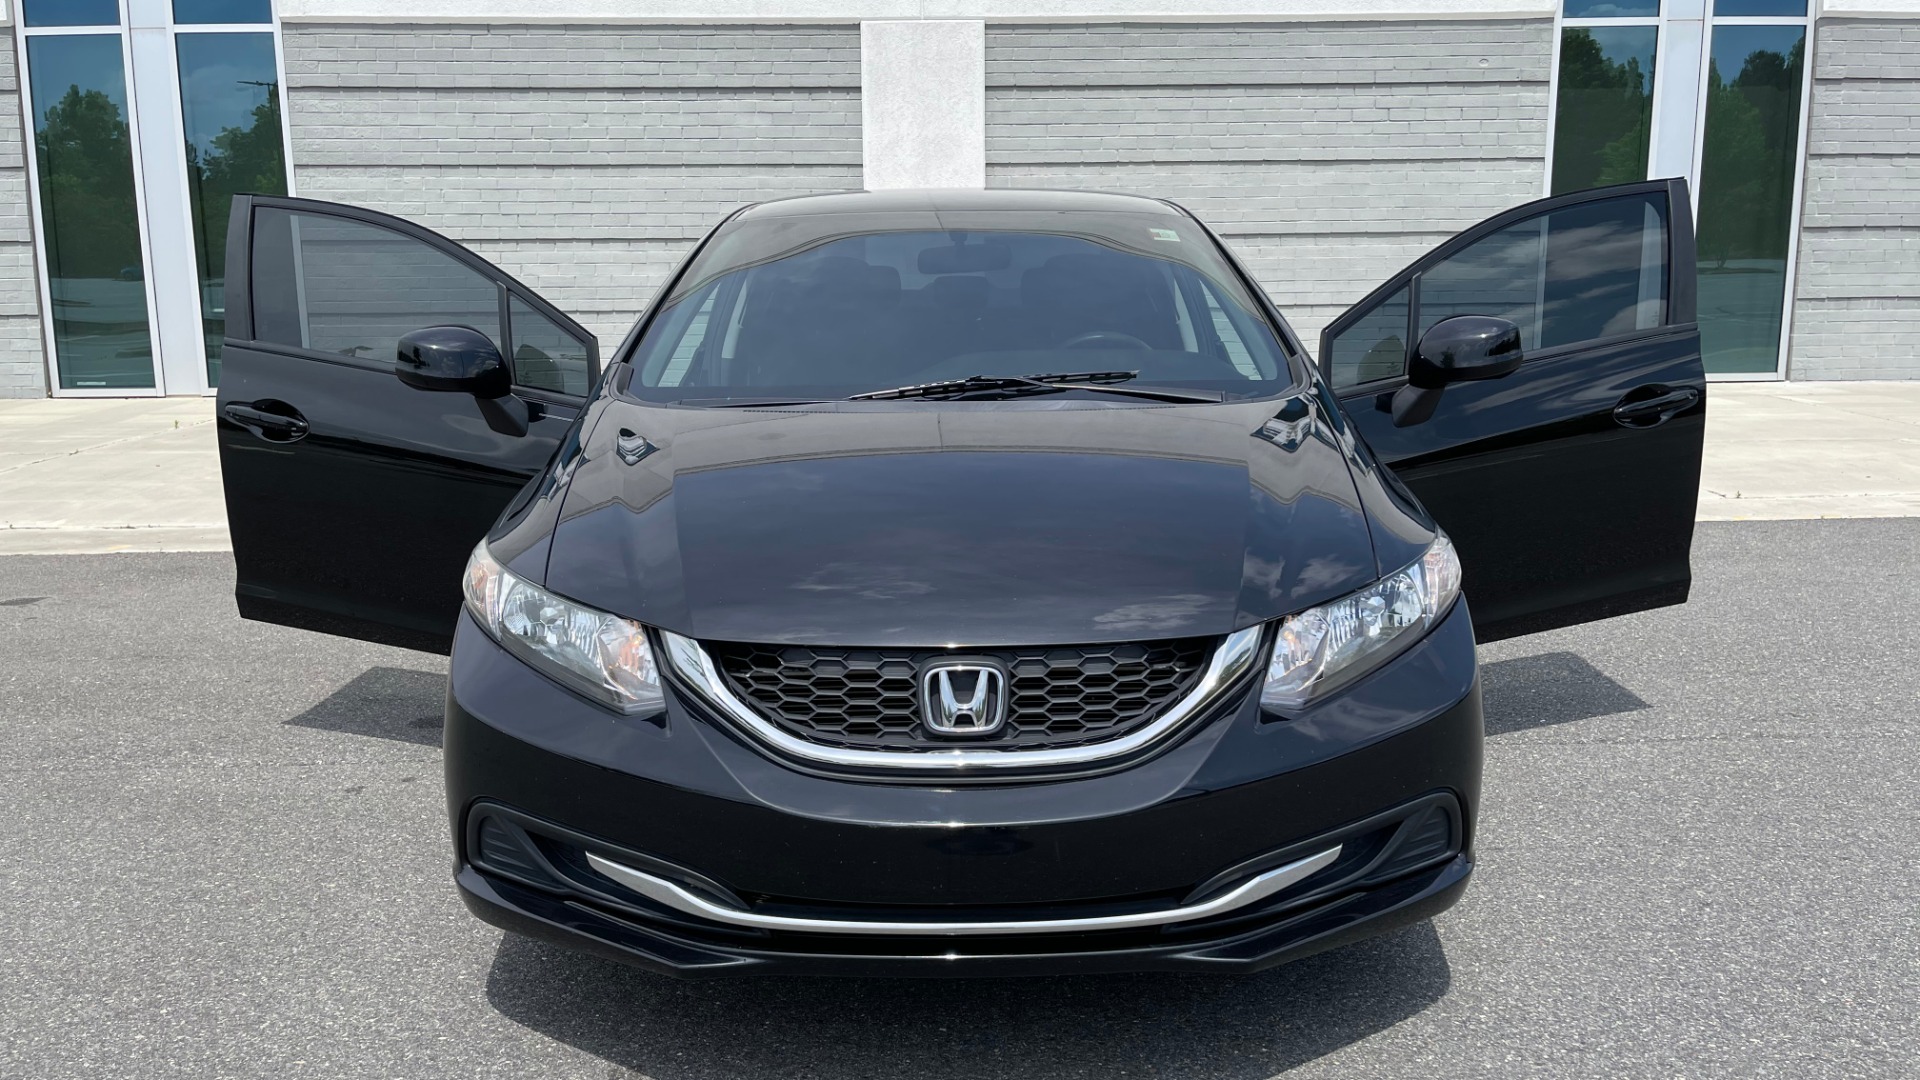 Used 2013 Honda CIVIC SEDAN LX / 5-SPD AUTO / 1.8L 4-CYL / BLUETOOTH / AIR CONDITIONING for sale Sold at Formula Imports in Charlotte NC 28227 14